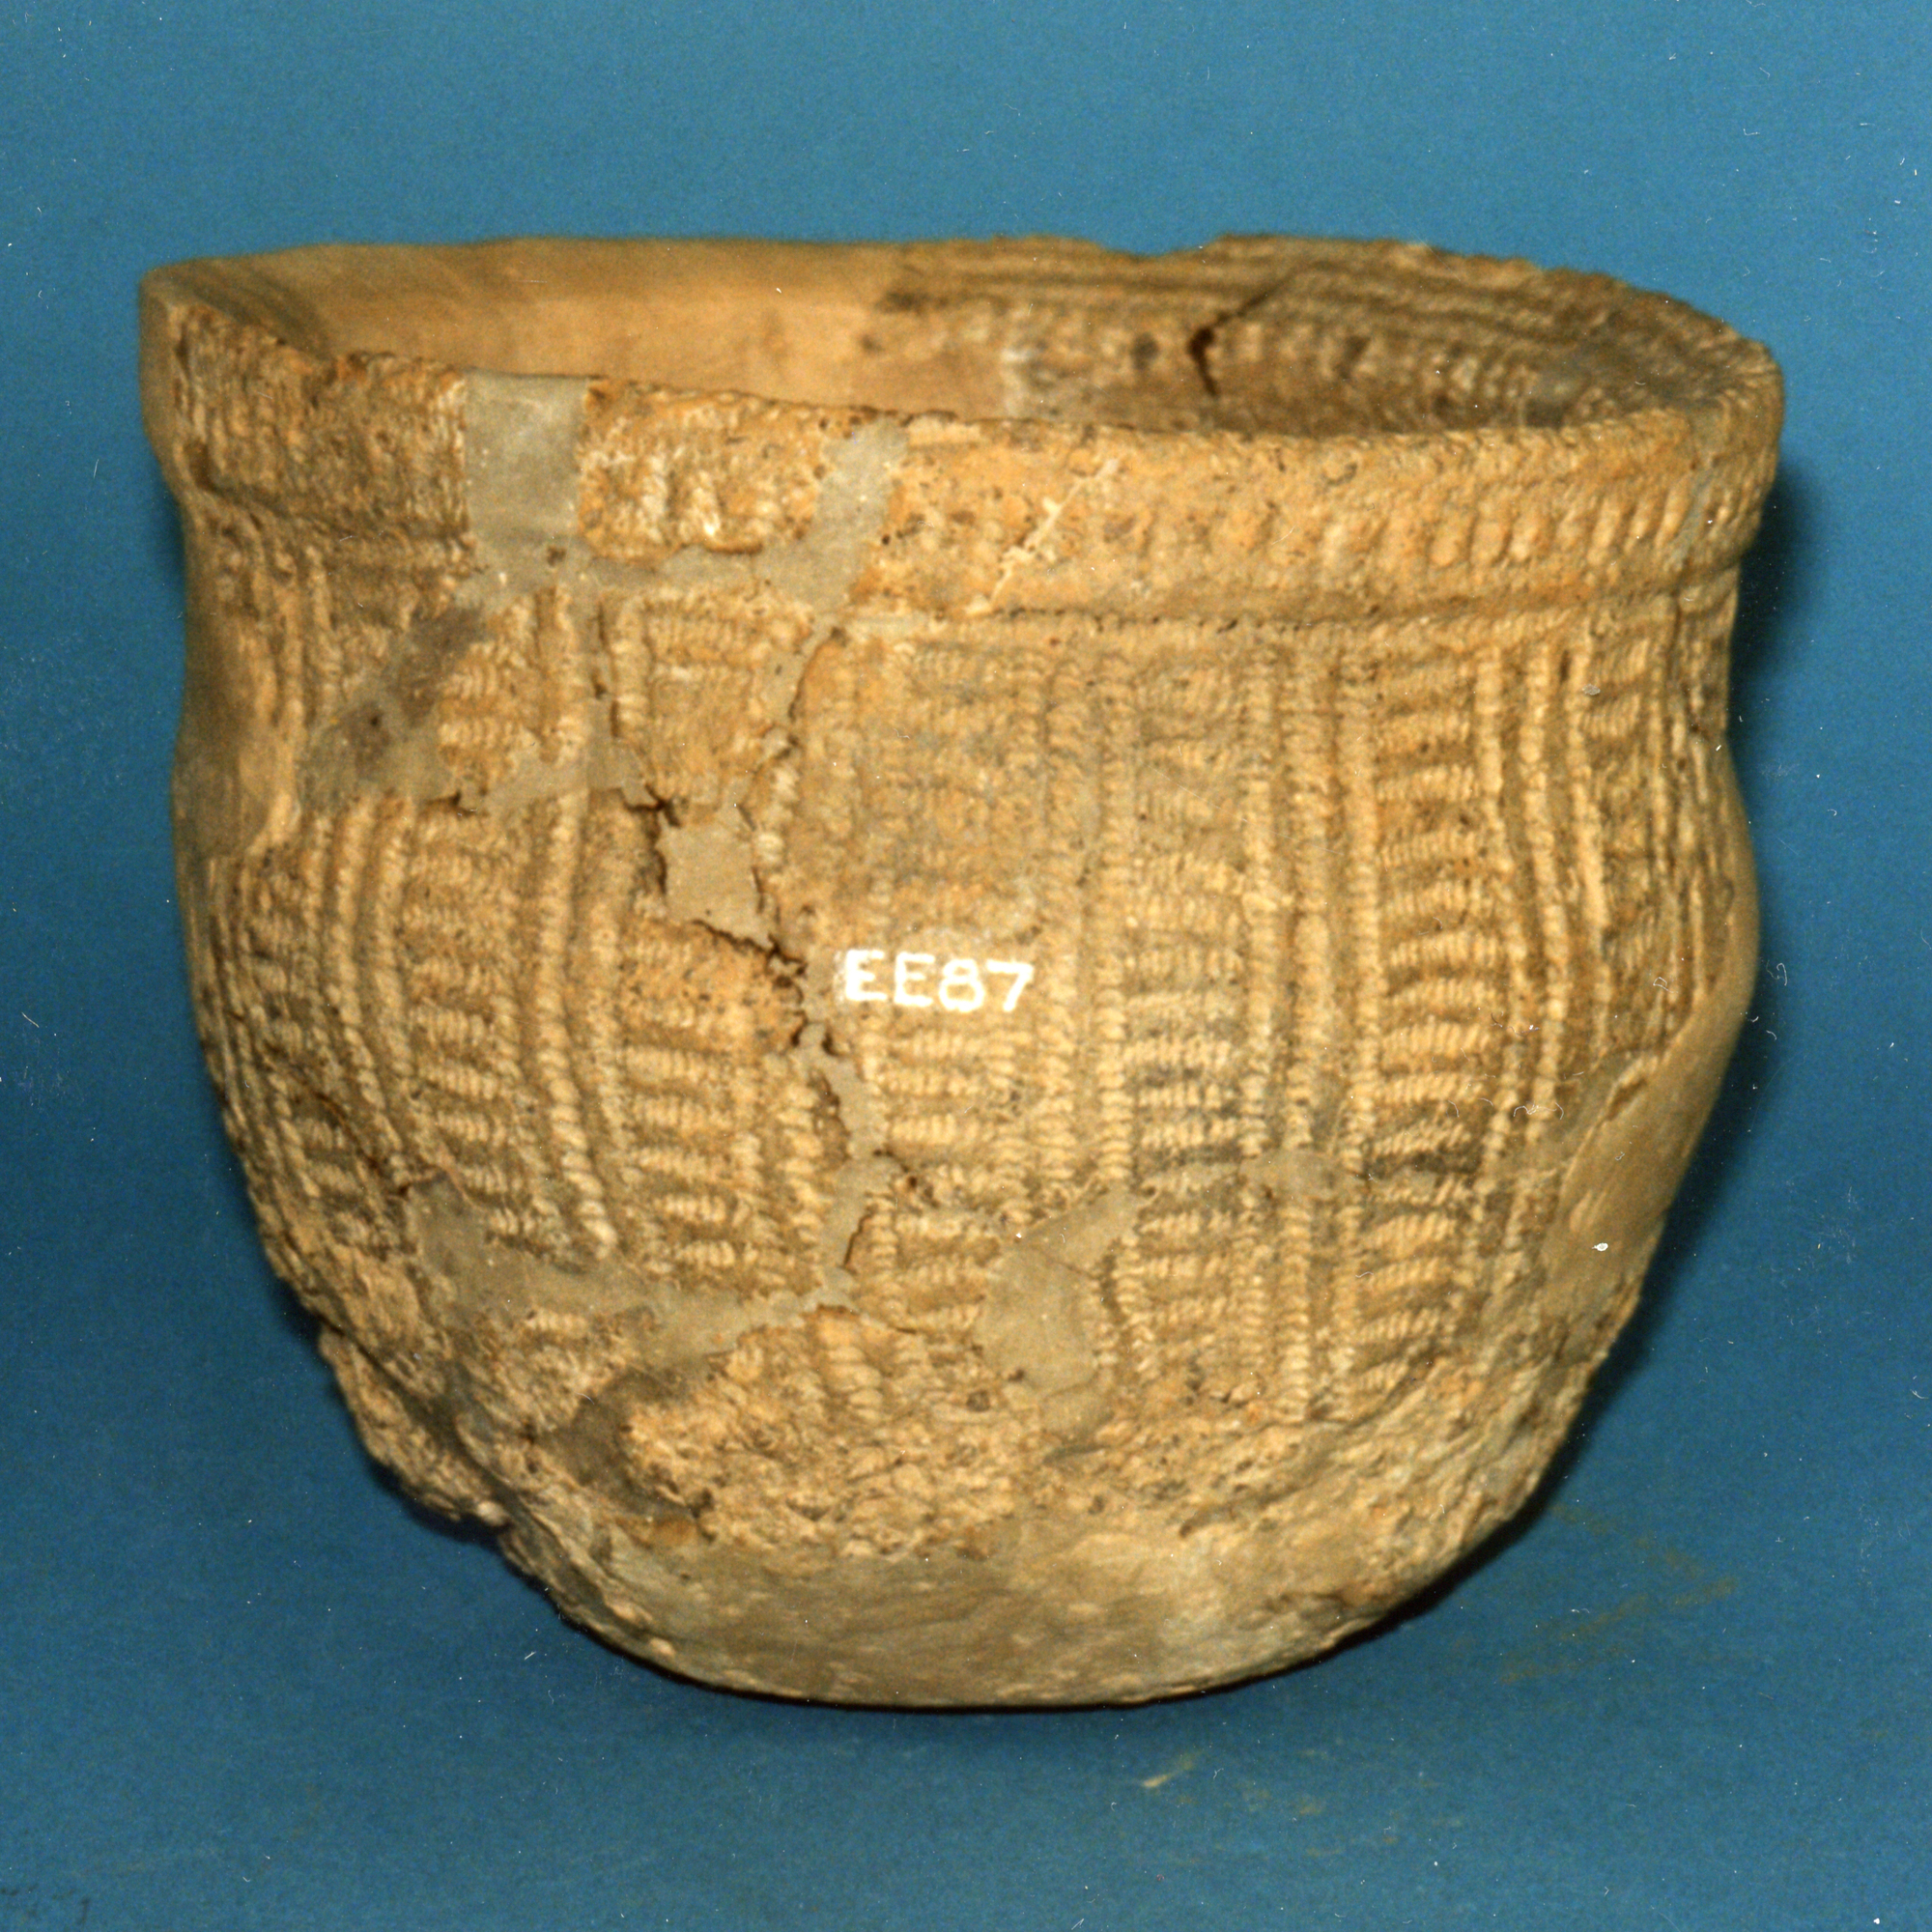 Image of Pottery food vessel from a cist near Doune Castle, Perthshire © National Museums Scotland